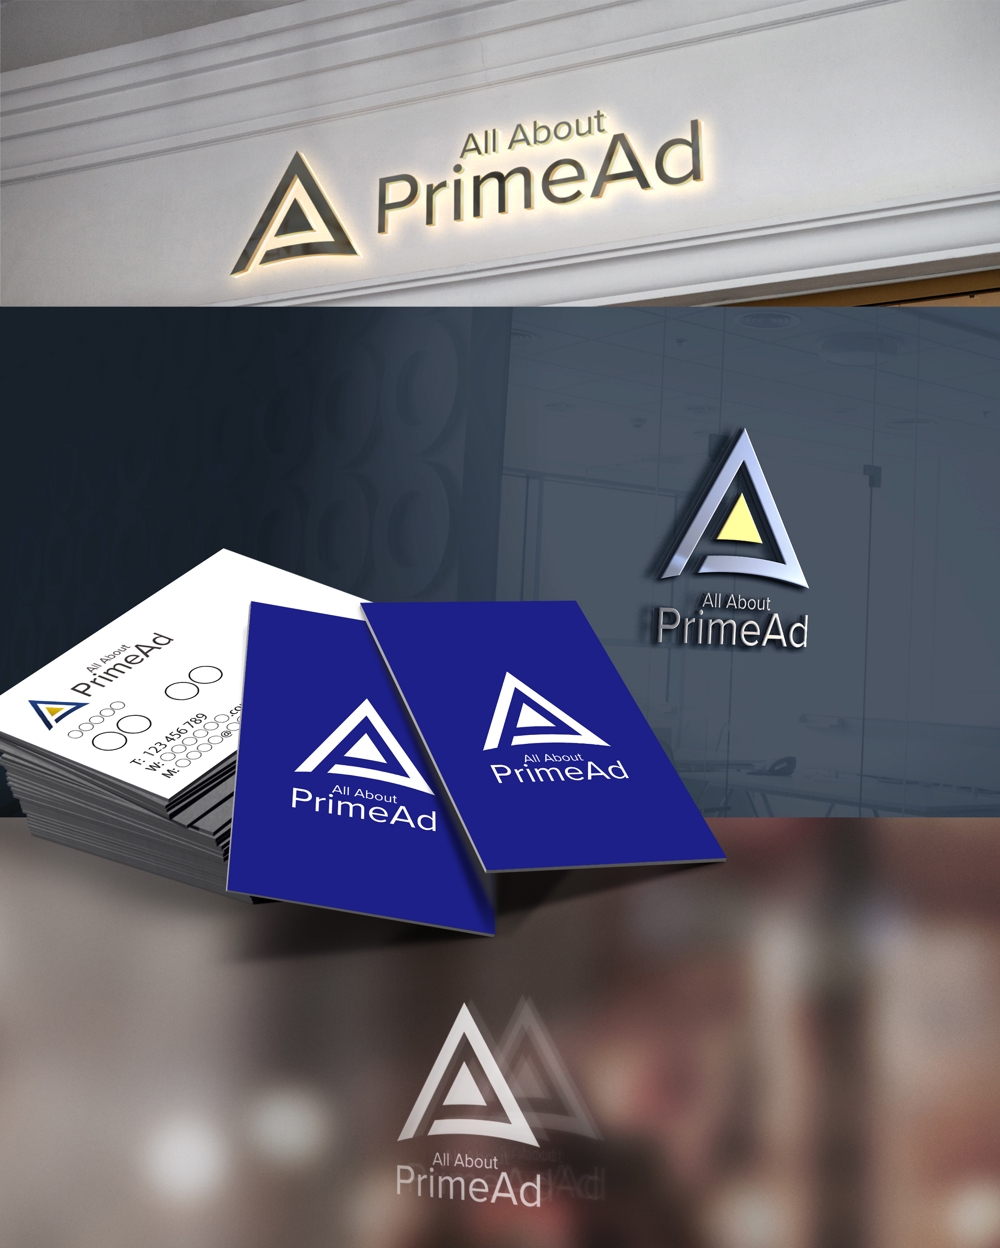 All-About-PrimeAd-2.jpg